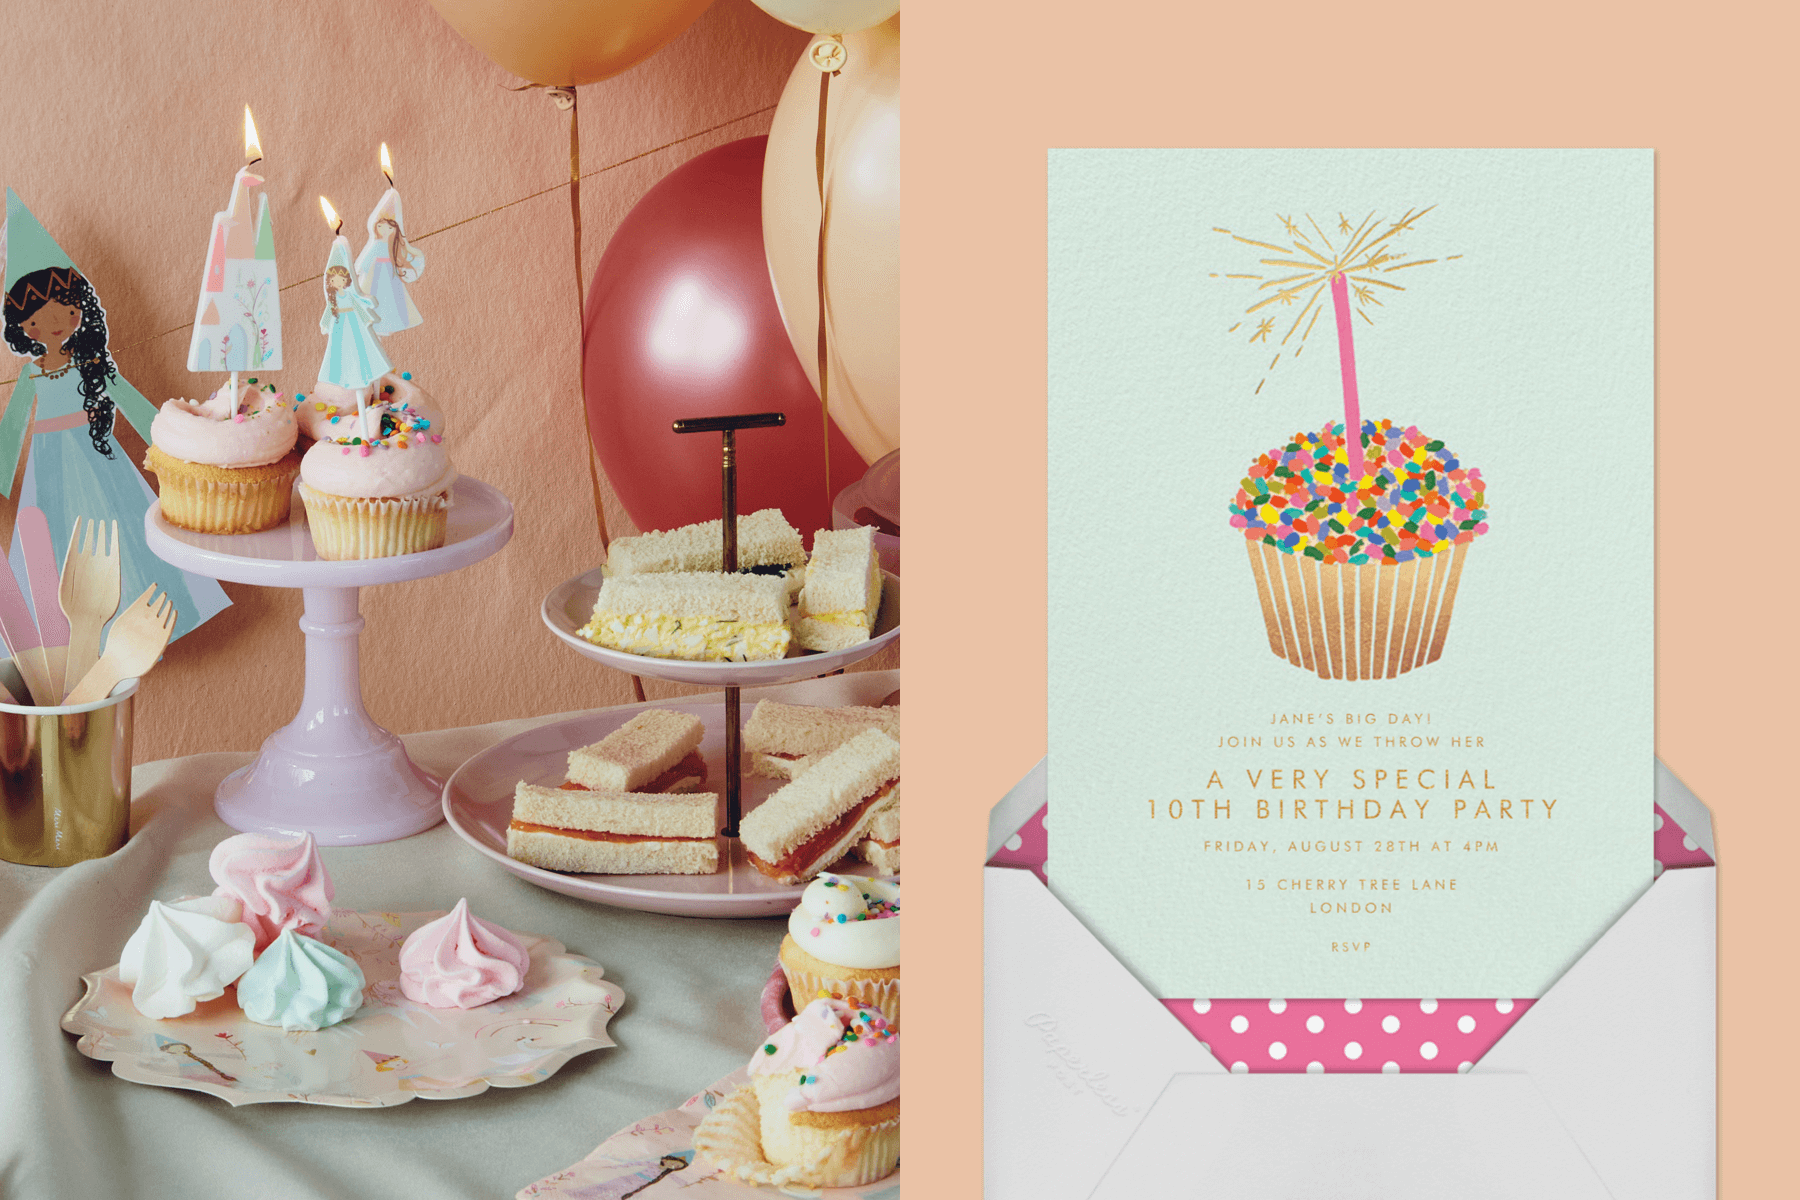 left: A party table with princess-themed cupcakes and bite-sized sandwiches. Right: An invitation shows a colorful cupcake with a sparkler.